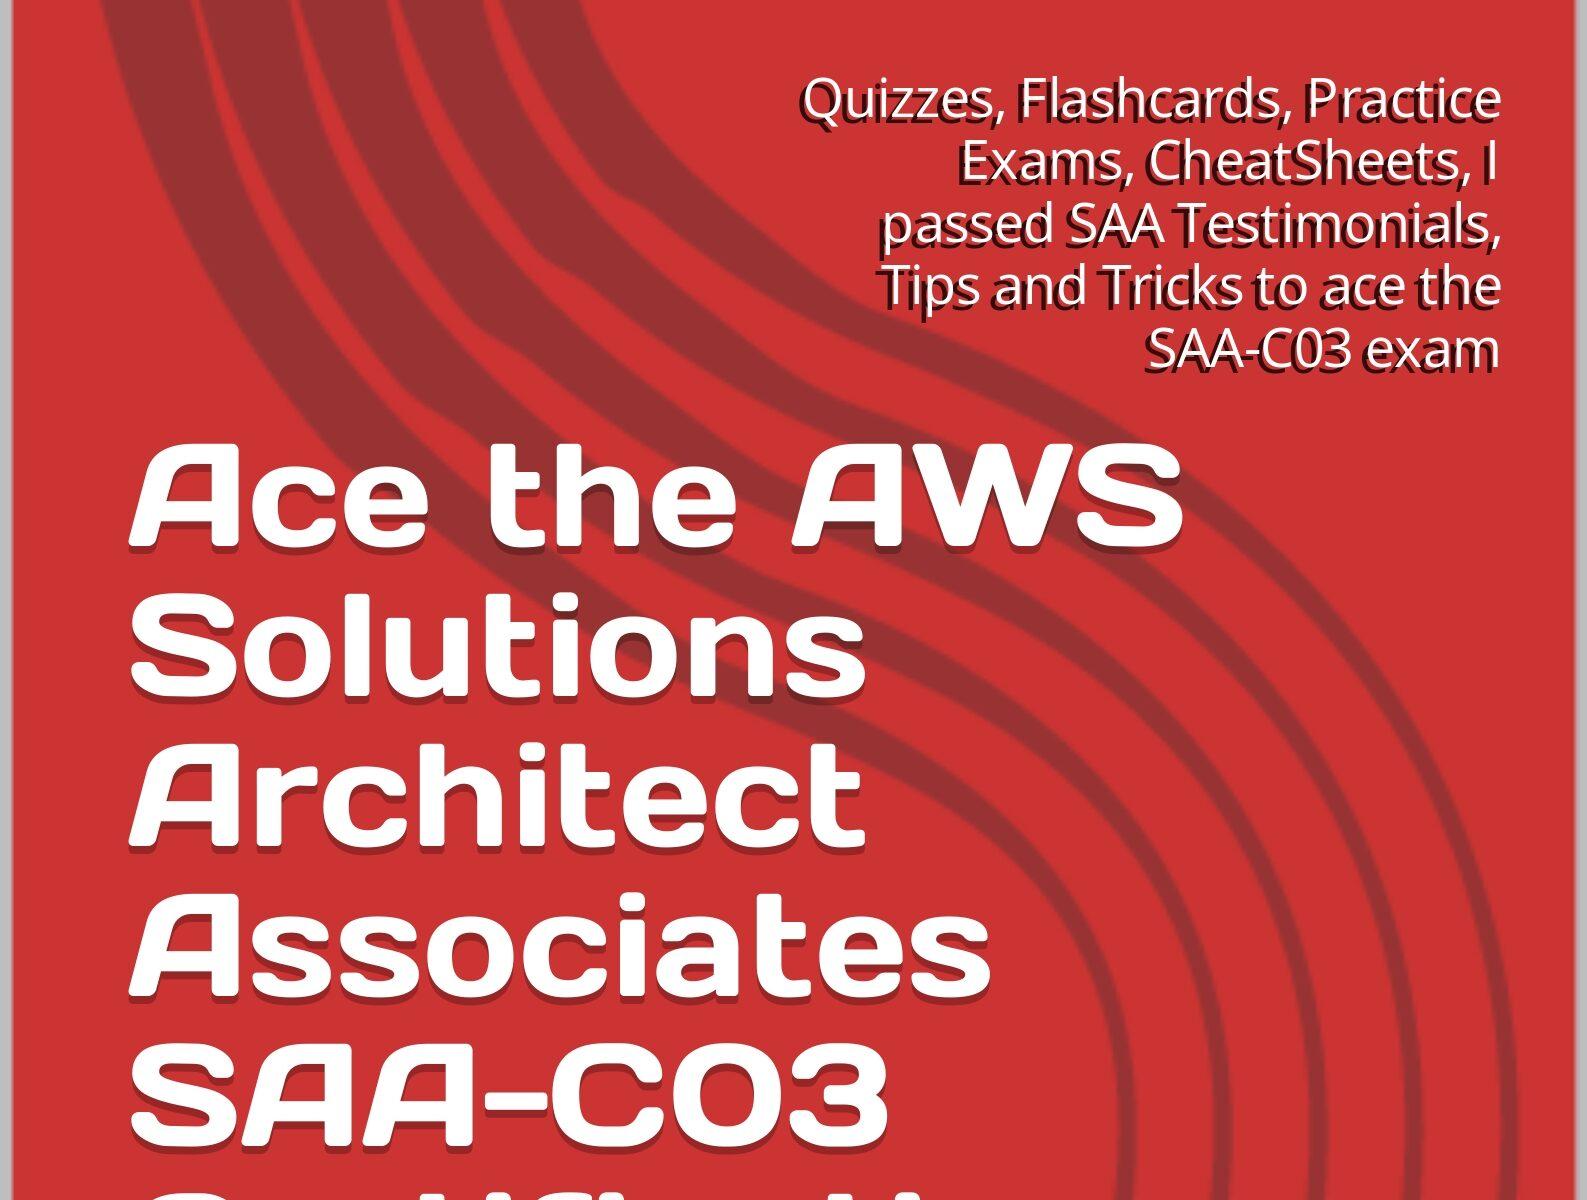 Ace the AWS Solutions Architect Associates SAA-C03 Certification Exam : Quizzes, Flashcards, Practice Exams, CheatSheets, I passed SAA Testimonials, Tips and Tricks to ace the SAA-C03 exam